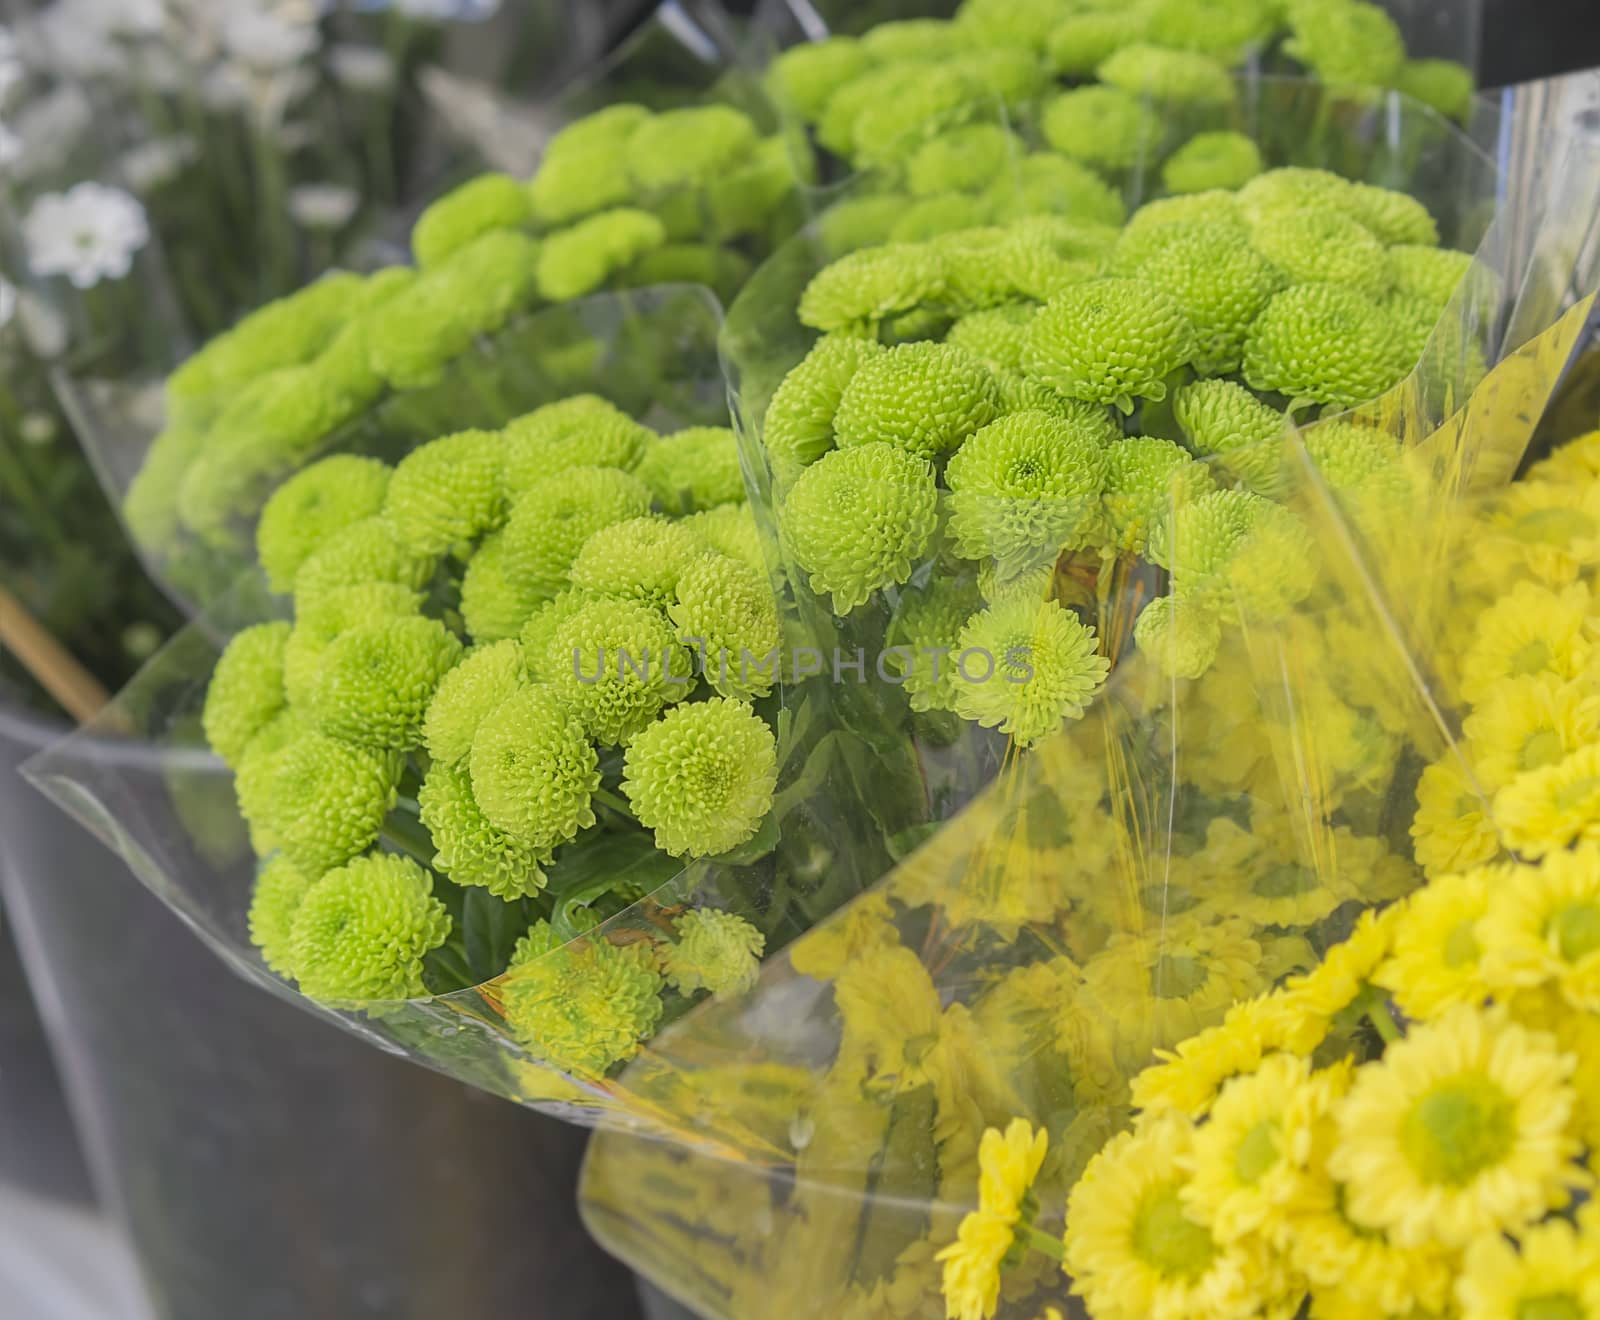 Bunches of Green Flowers Chrysanthemums at Flower Market by sherj